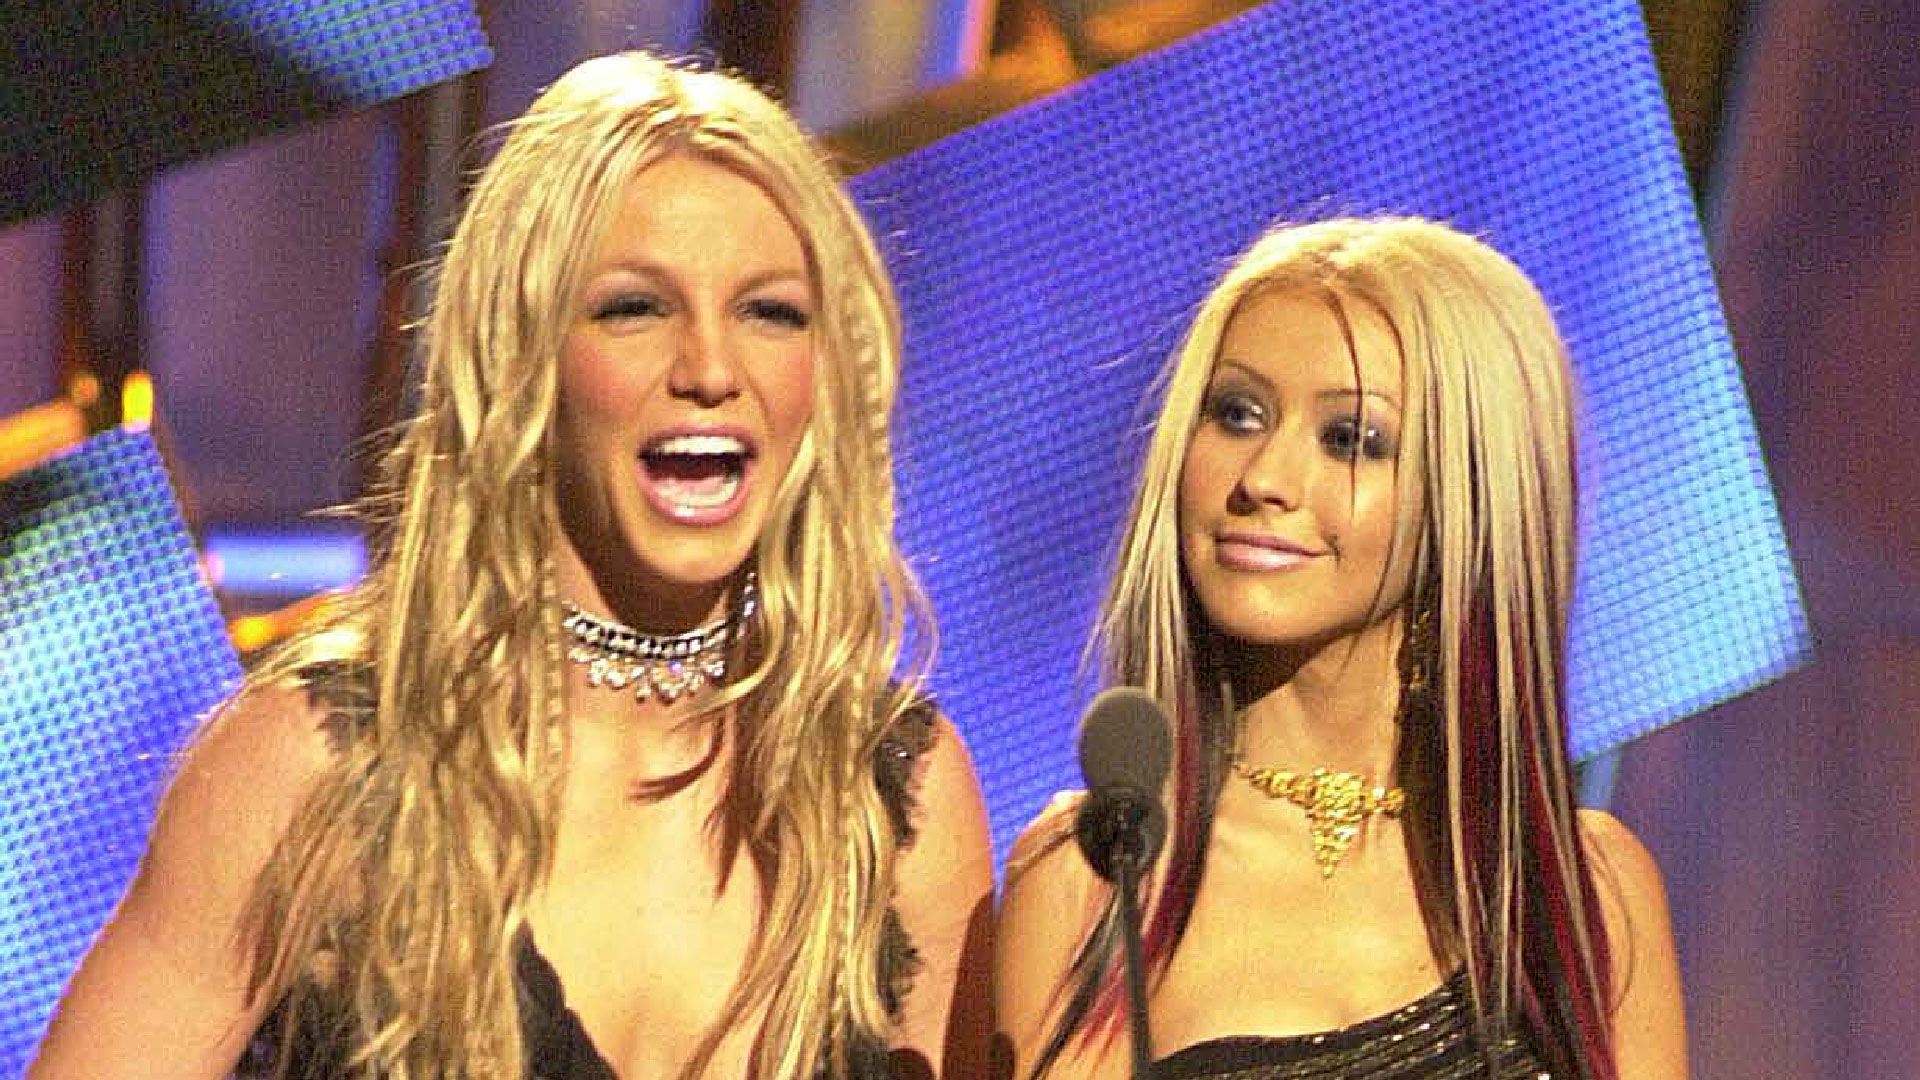 Britney Spears and Christina Aguilera during MTV VMA 2000 Stage at Radio City Music Hall in New York City, New York, United States.